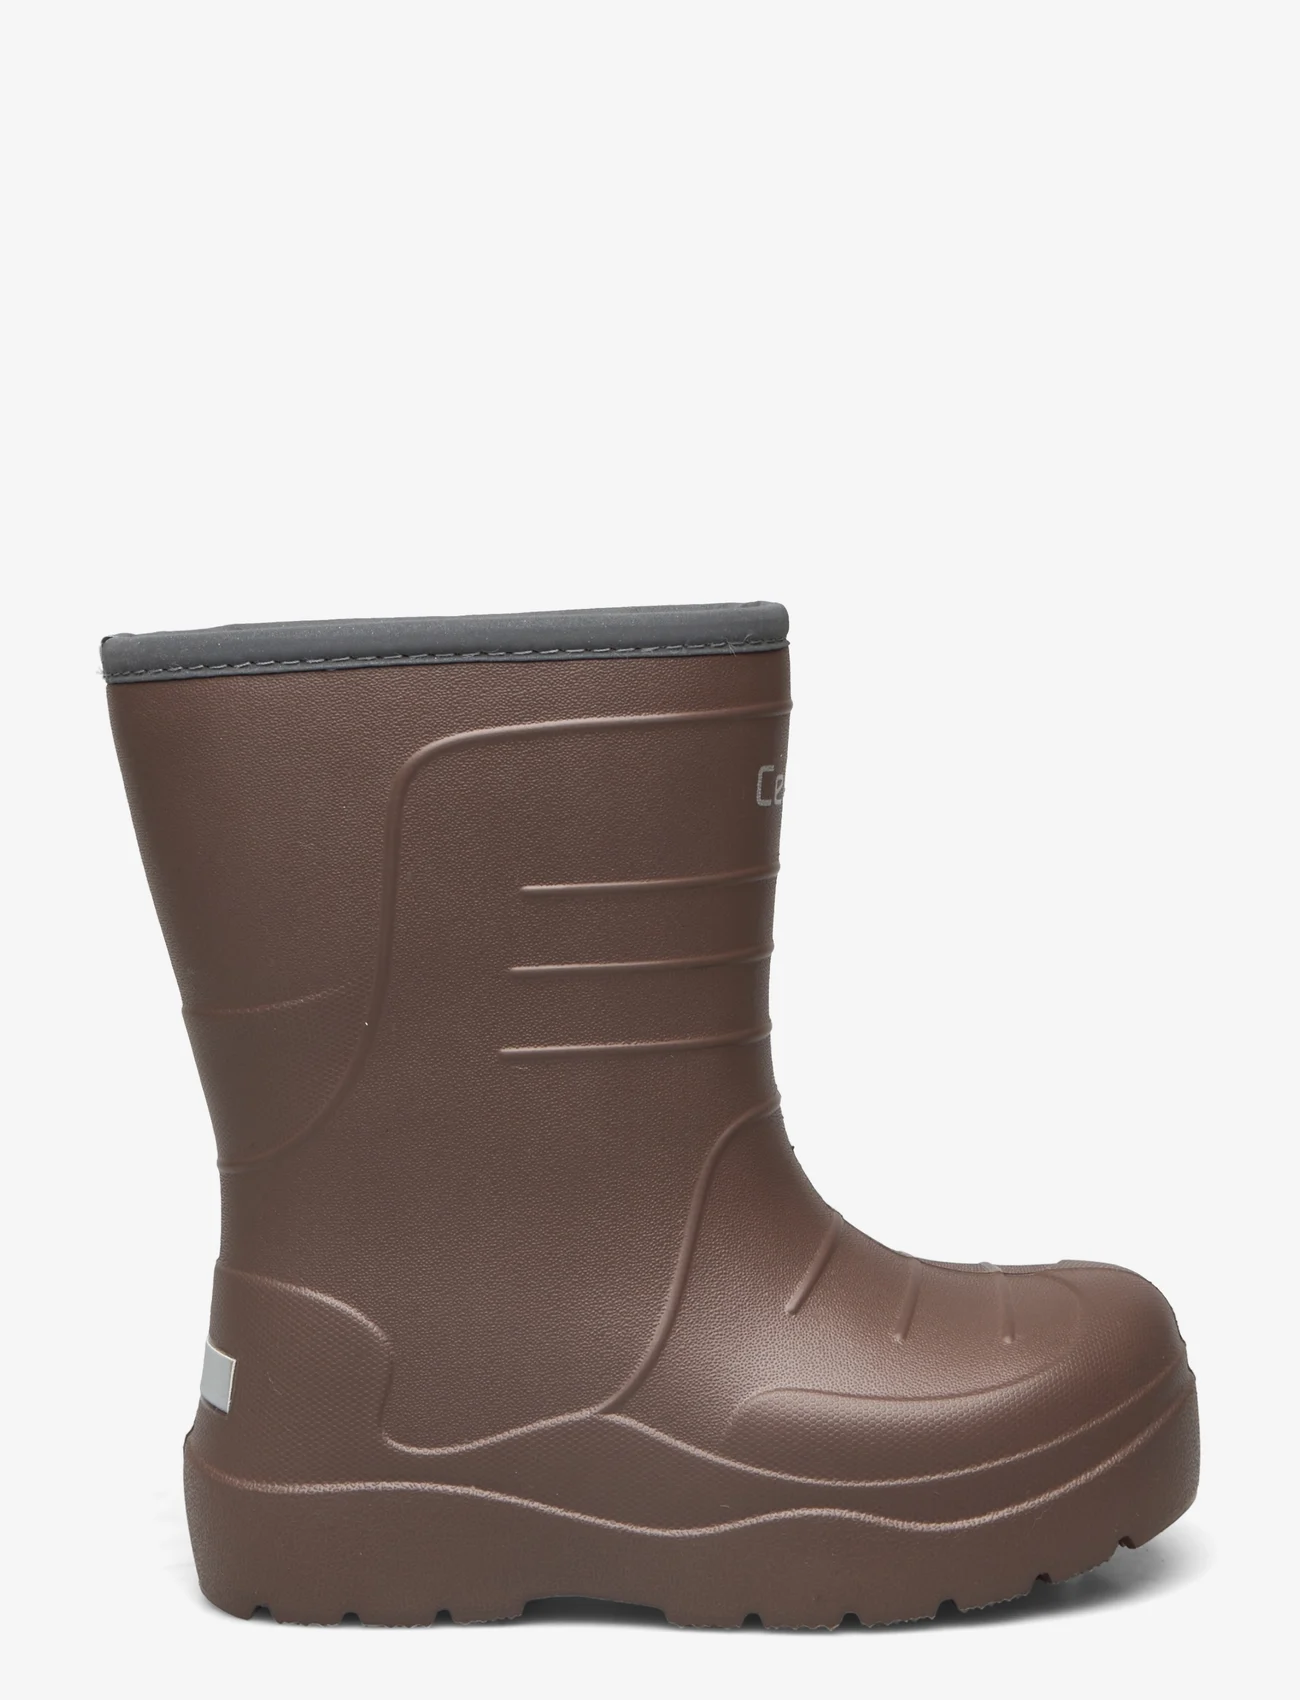 CeLaVi - Thermal Wellies - Embossed - lined rubberboots - coffee quartz - 1